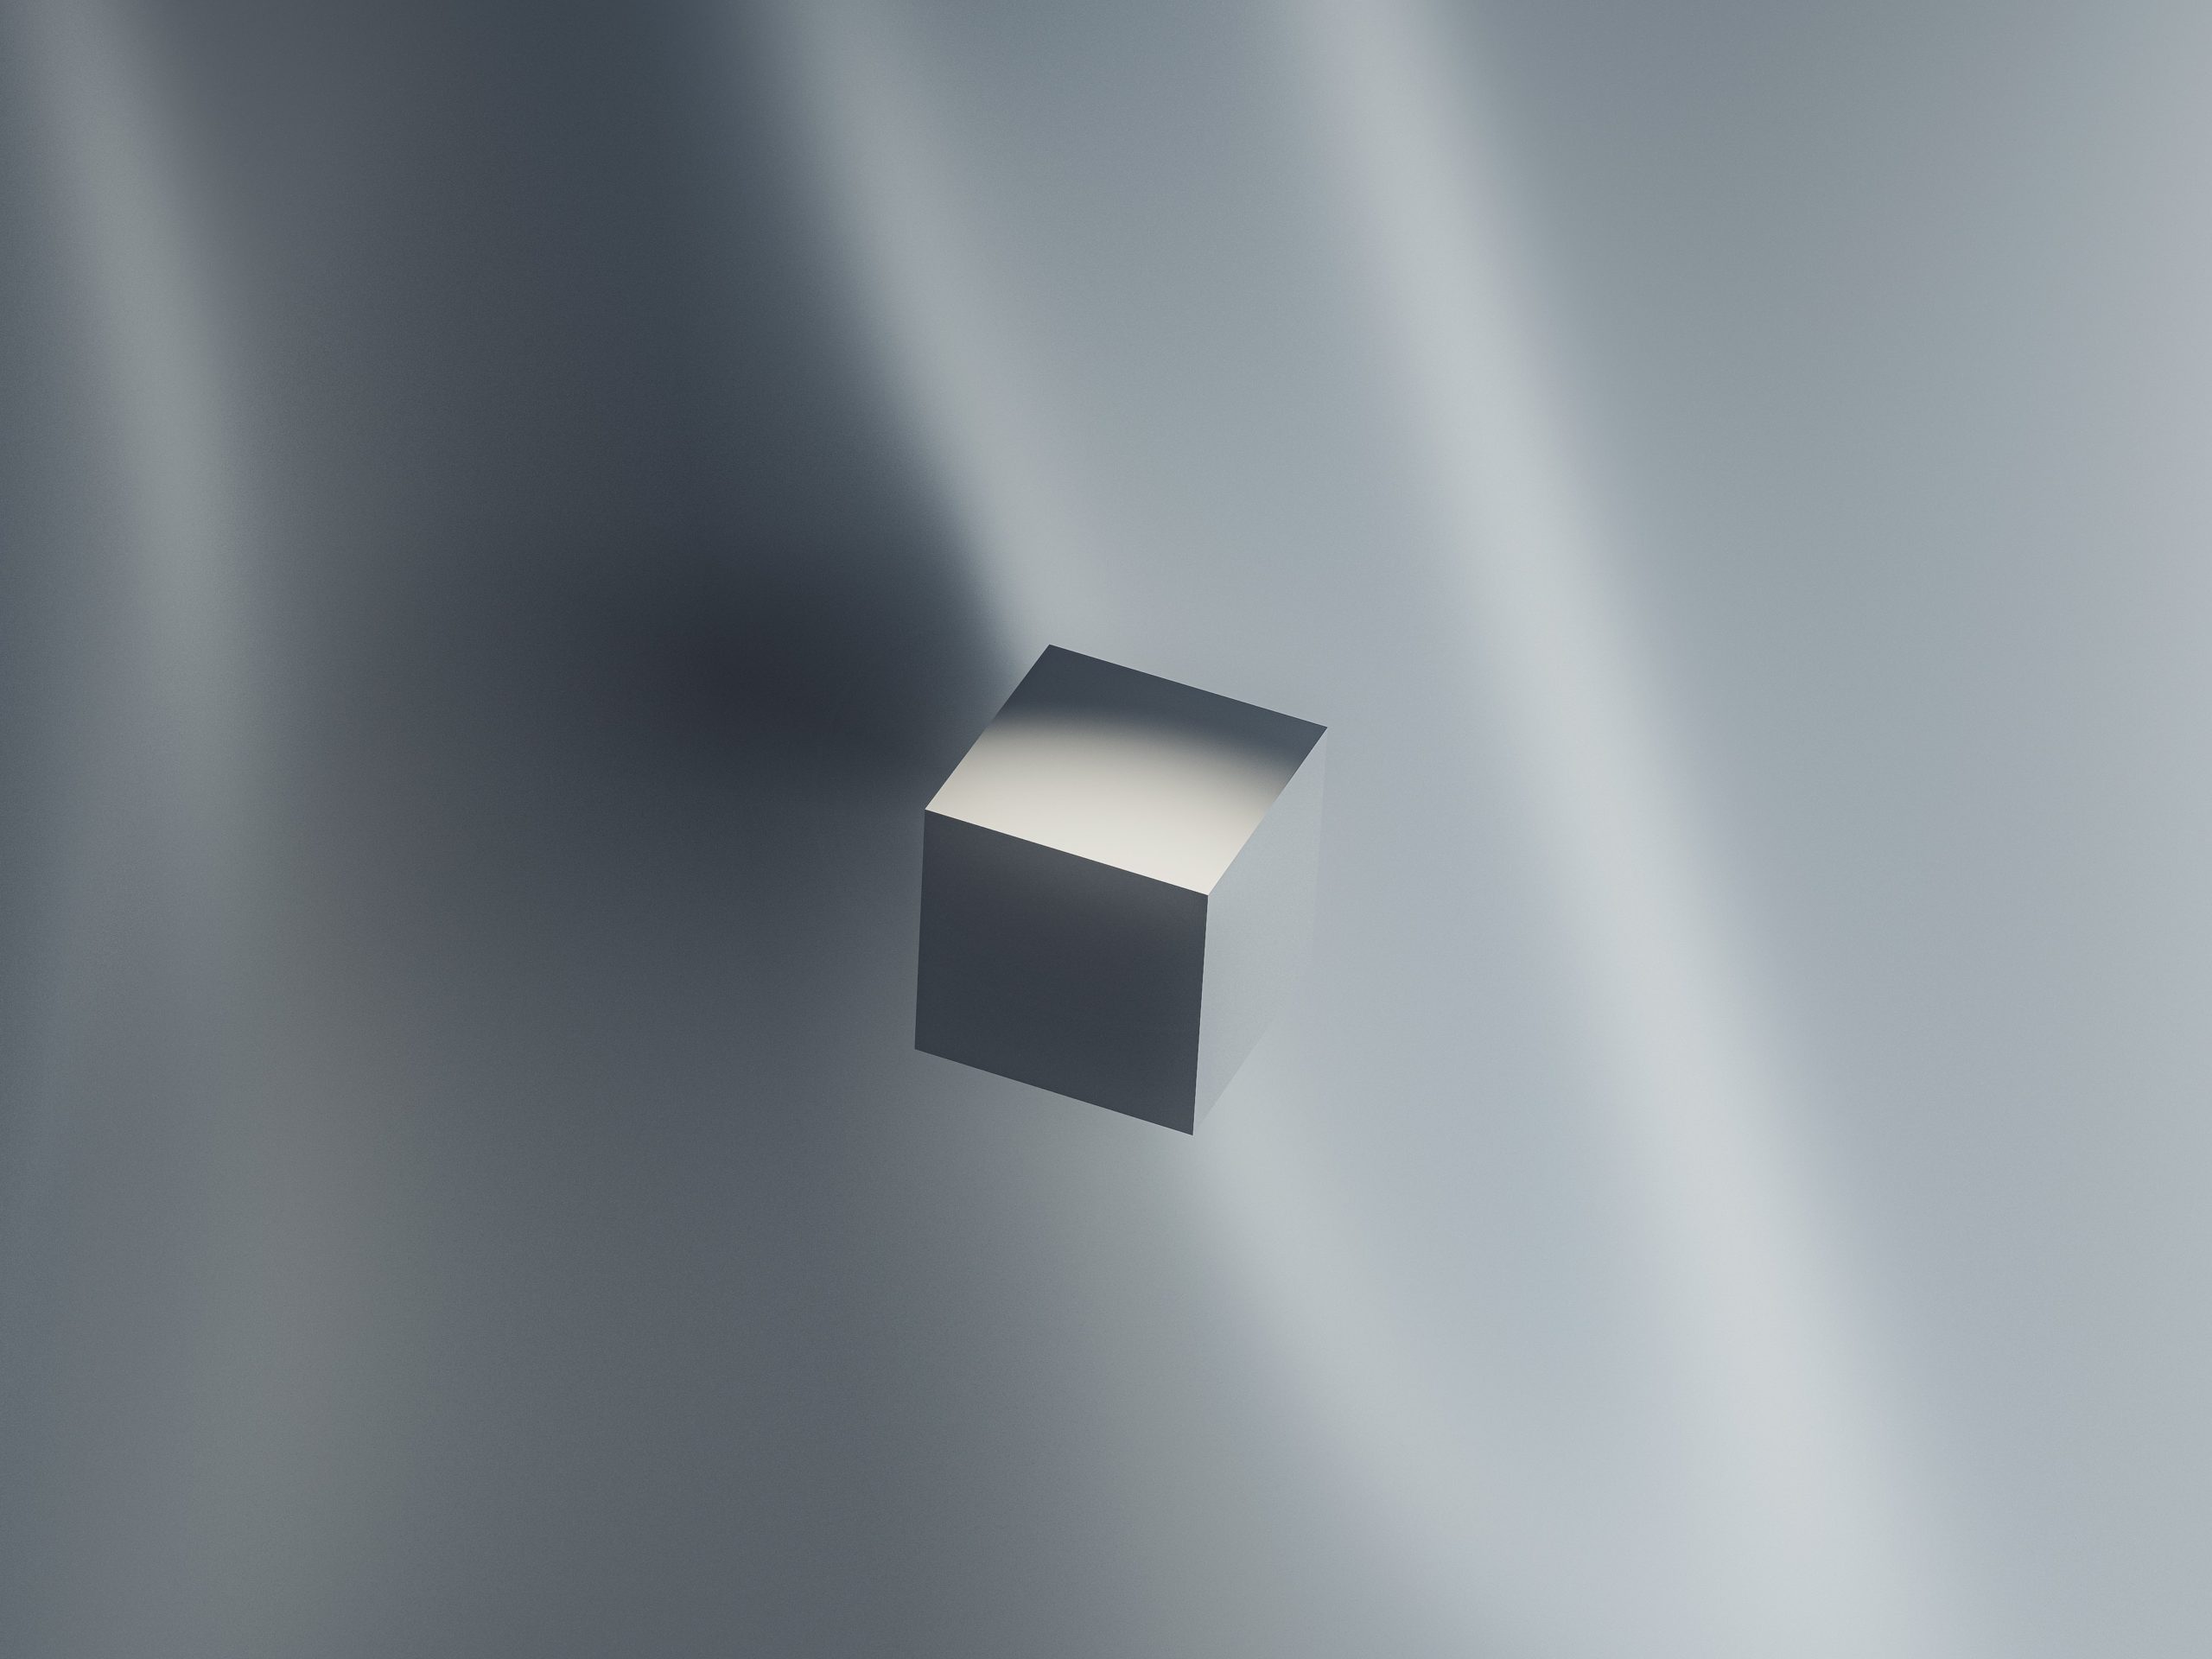 grey cube floating in a grey background